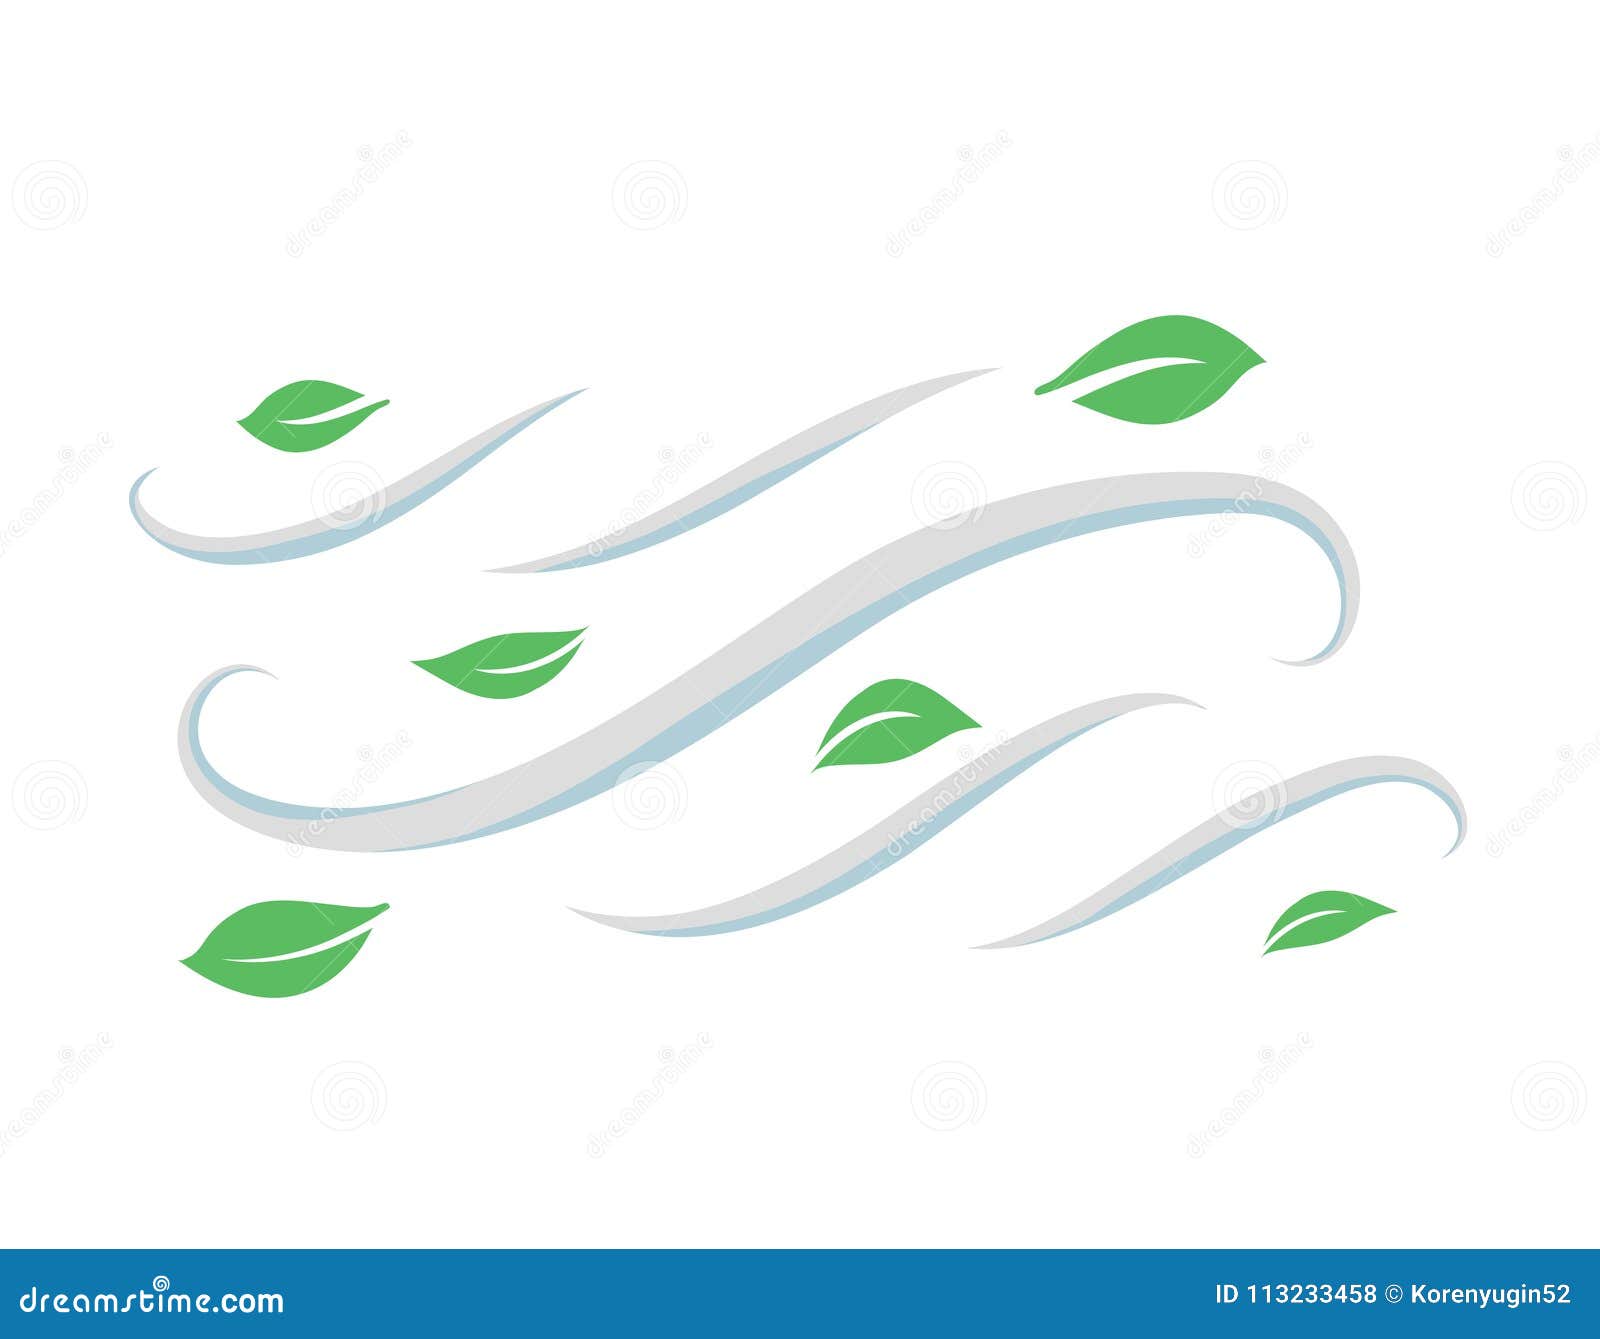 windy weather icon in cartoon style  on white background